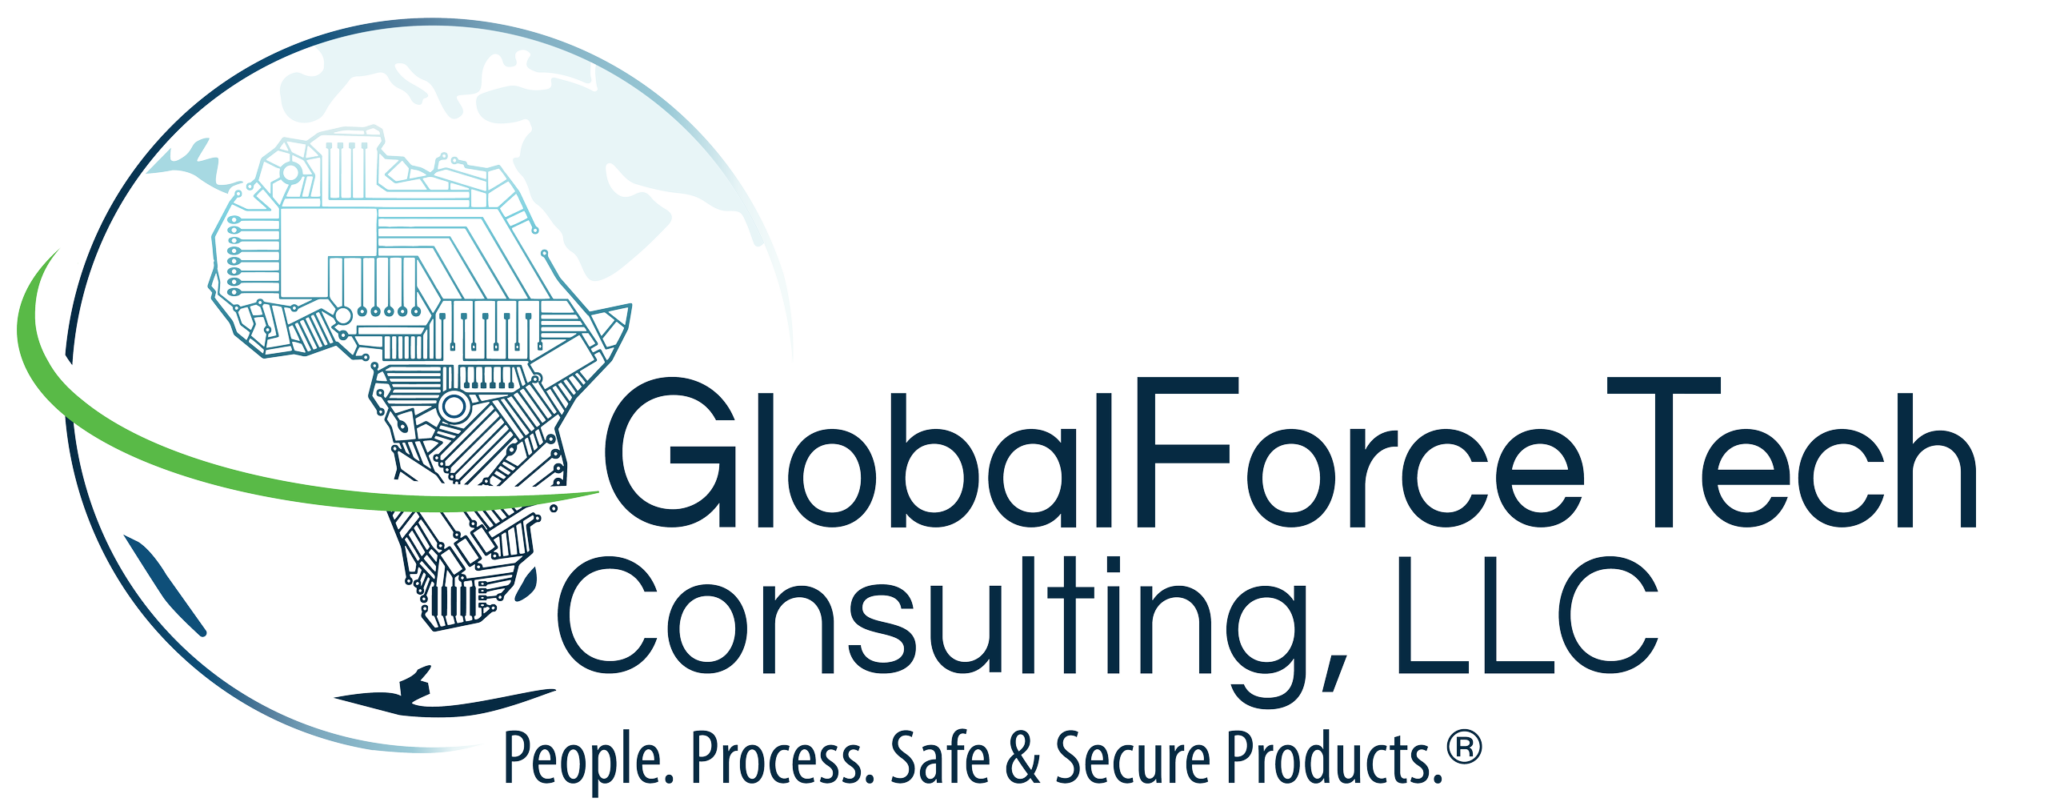 Home - GlobalForce Tech Consulting, LLC